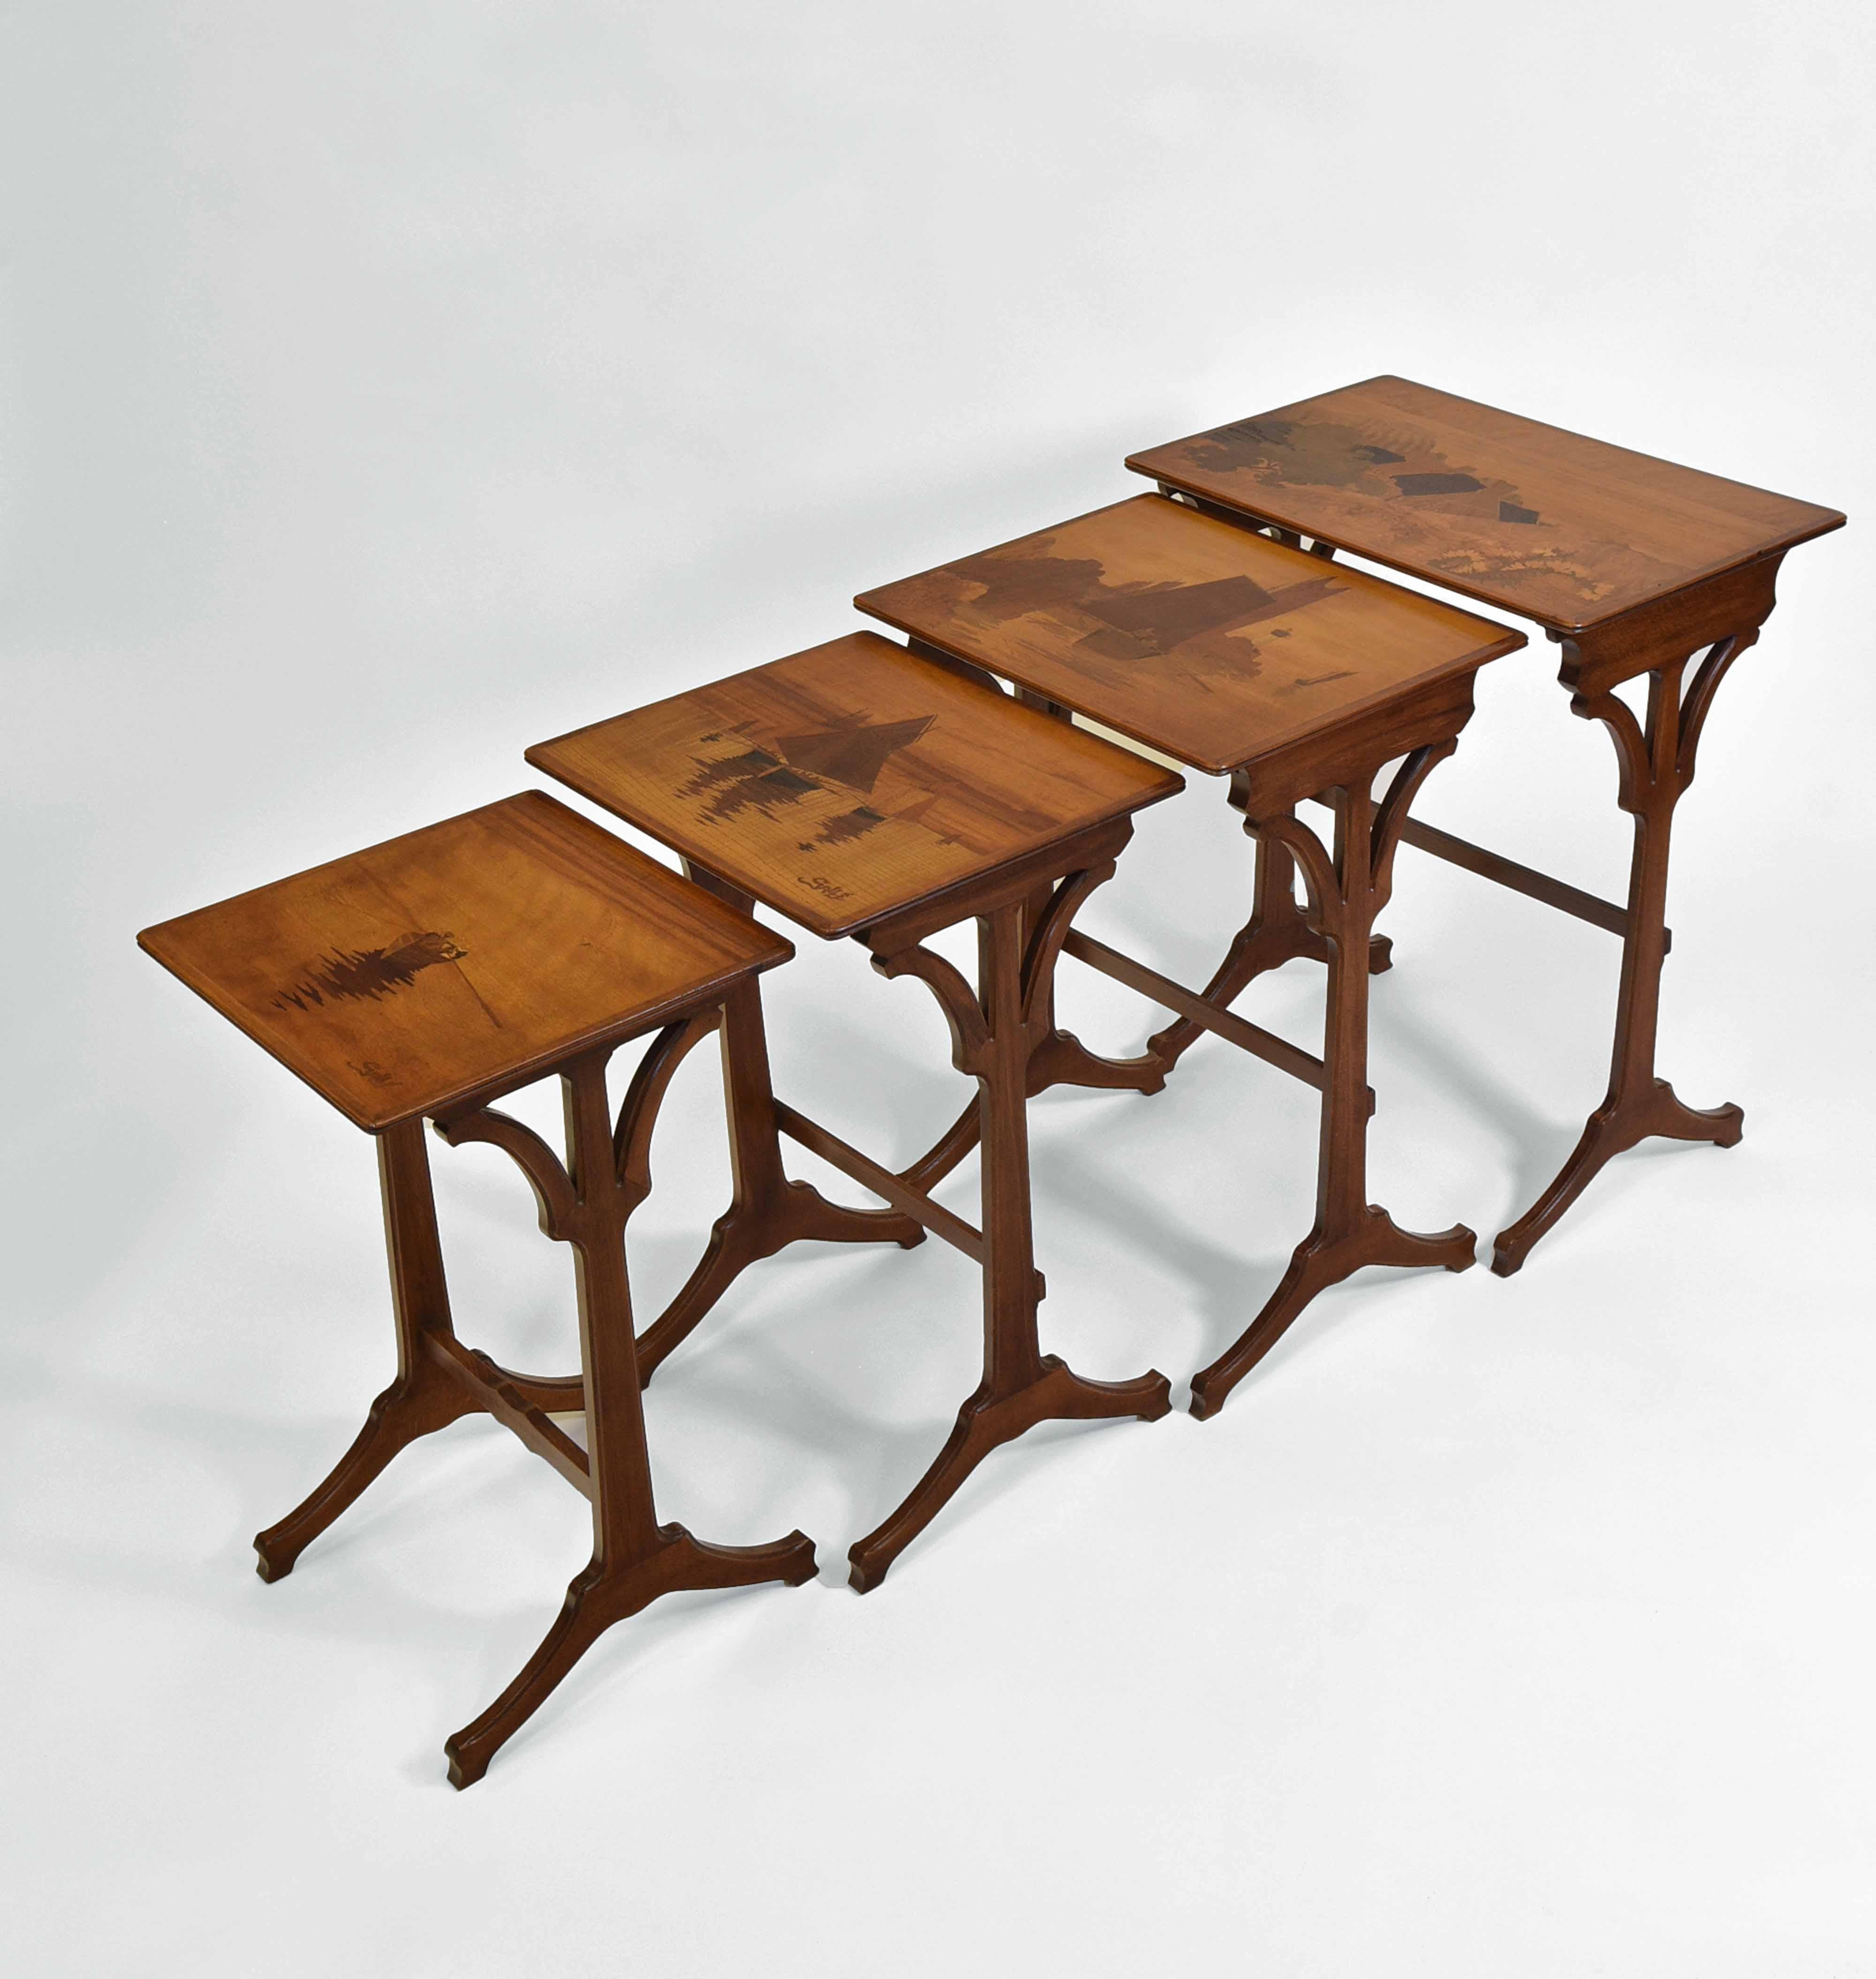 Superb French Art Nouveau nest of tables with graduated tops, having specimen wood inlays with nautical themes of Brittany. Each table signed in marquetry, 'Gallé'. Circa 1900.

Each table top is a work of art in its own right, a fabulous series